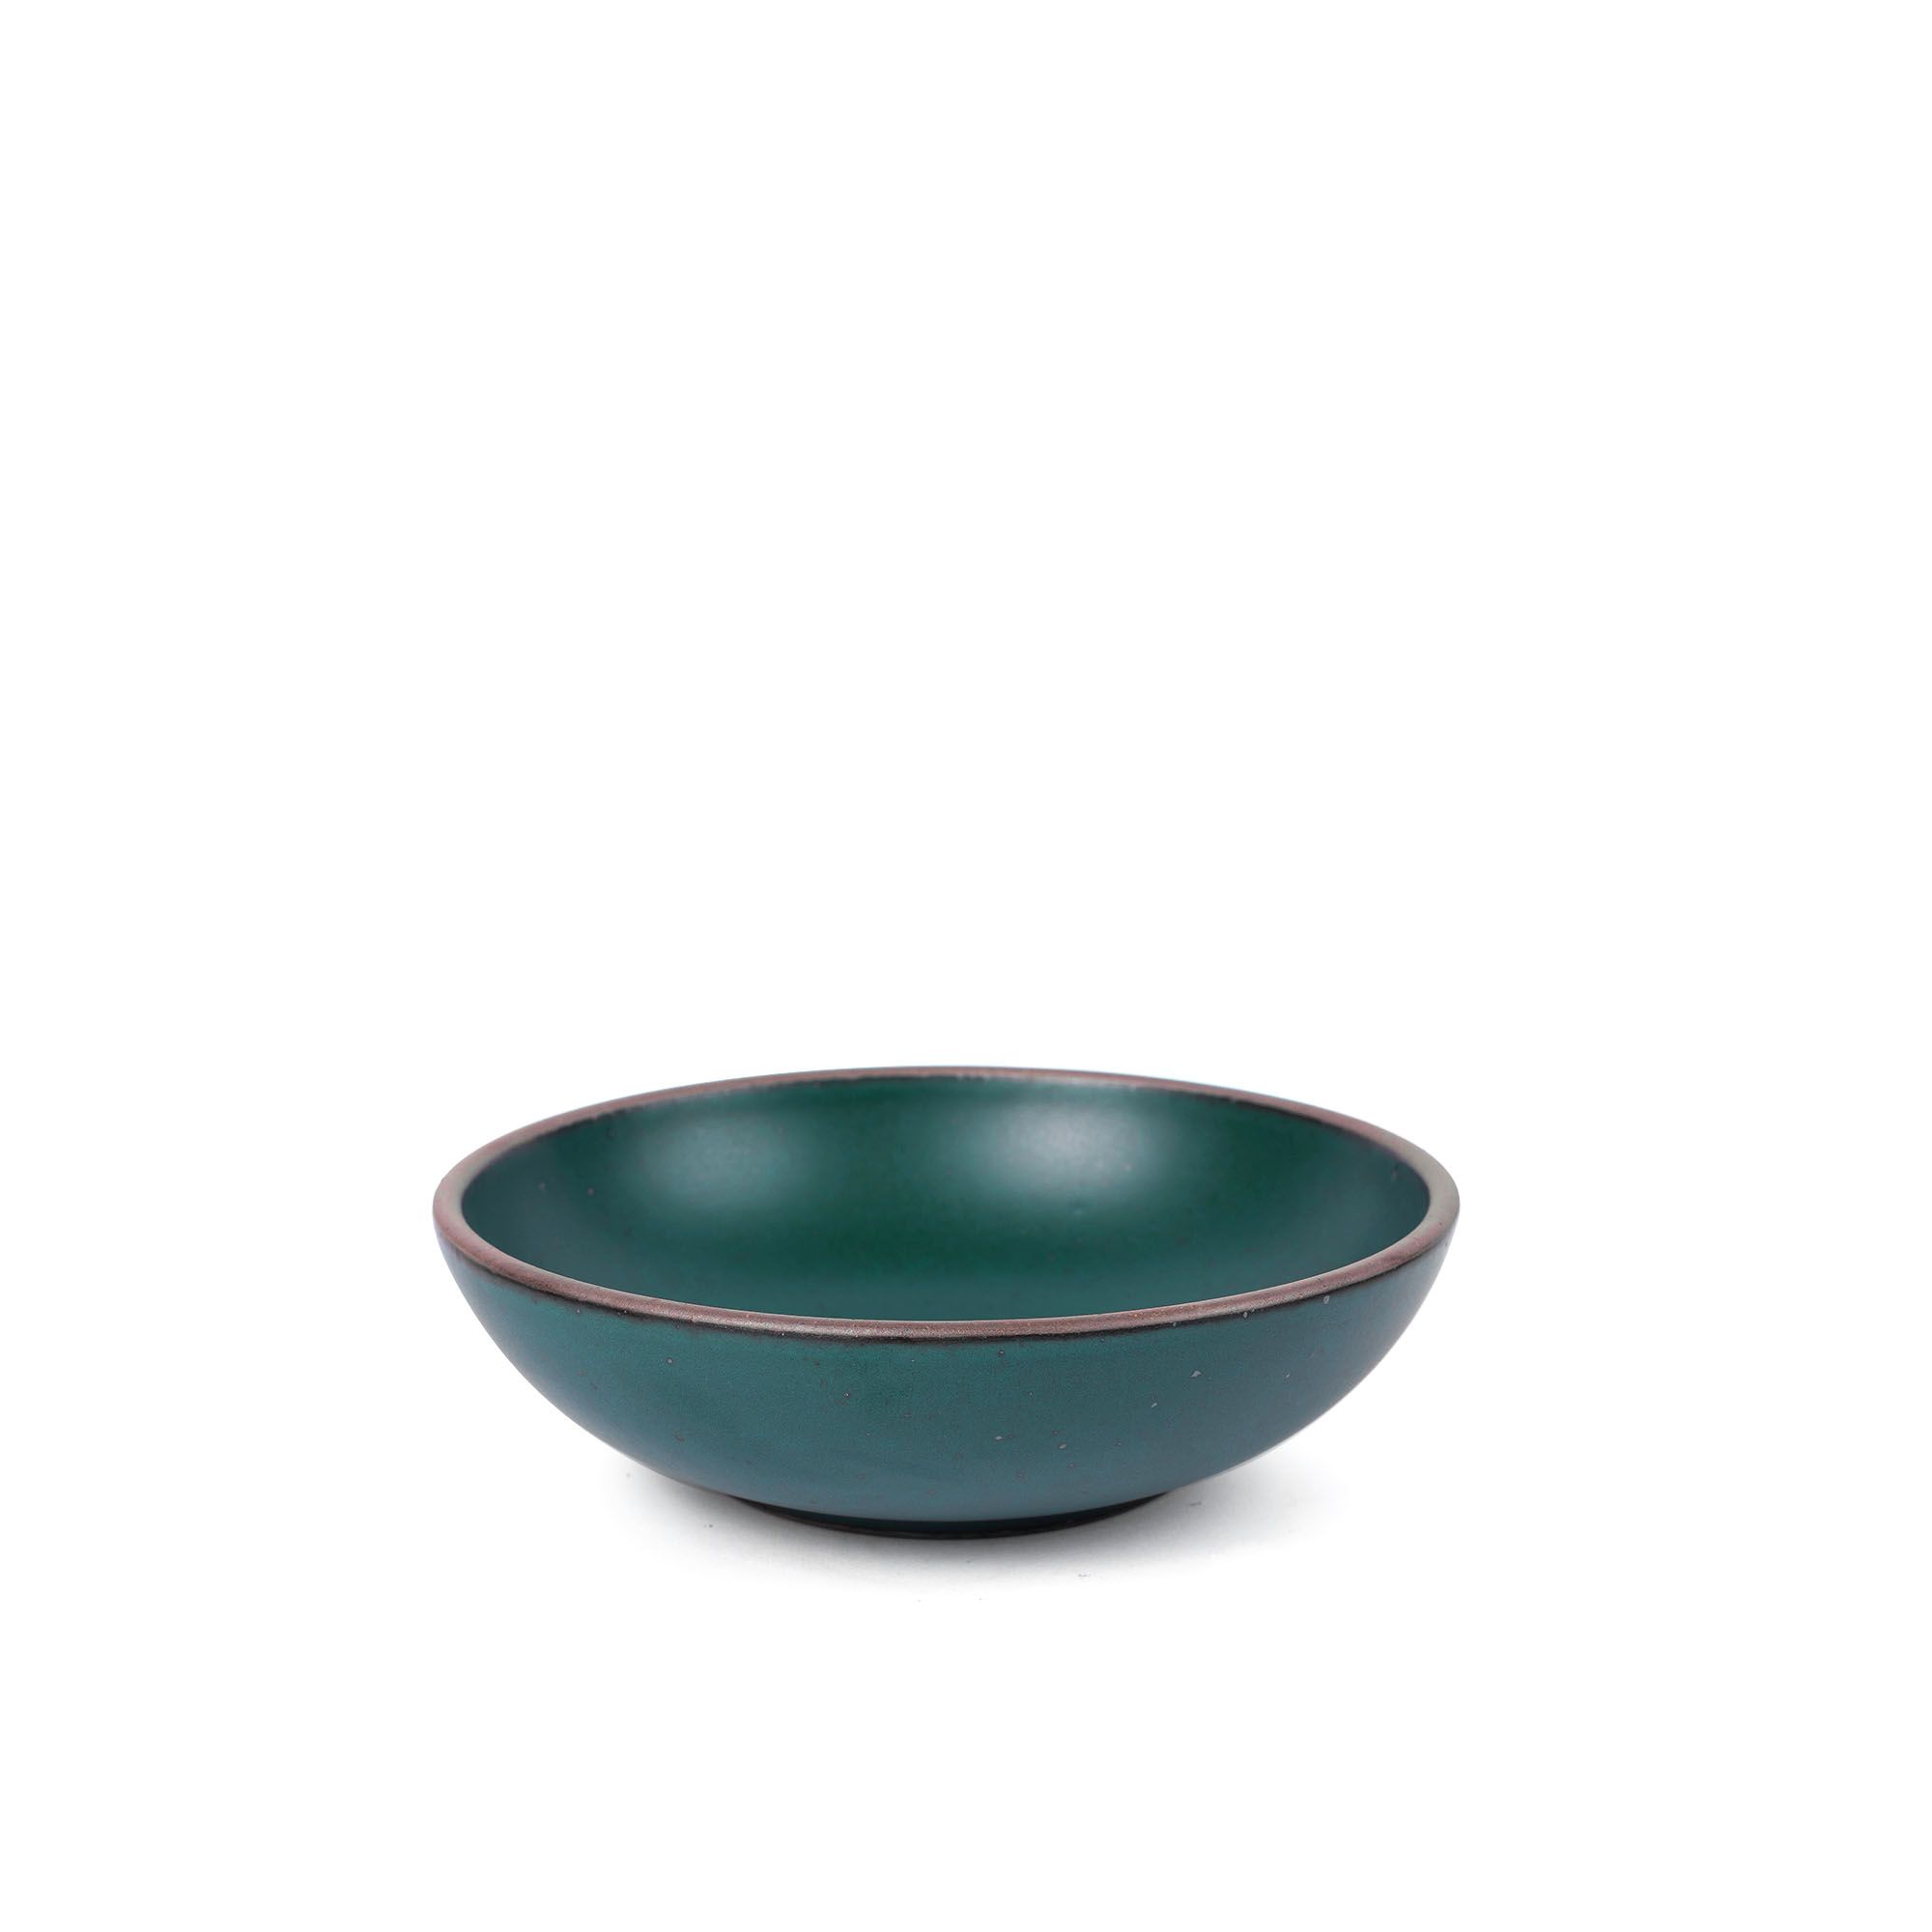 A dinner-sized shallow ceramic bowl in a deep dark teal color featuring iron speckles and an unglazed rim